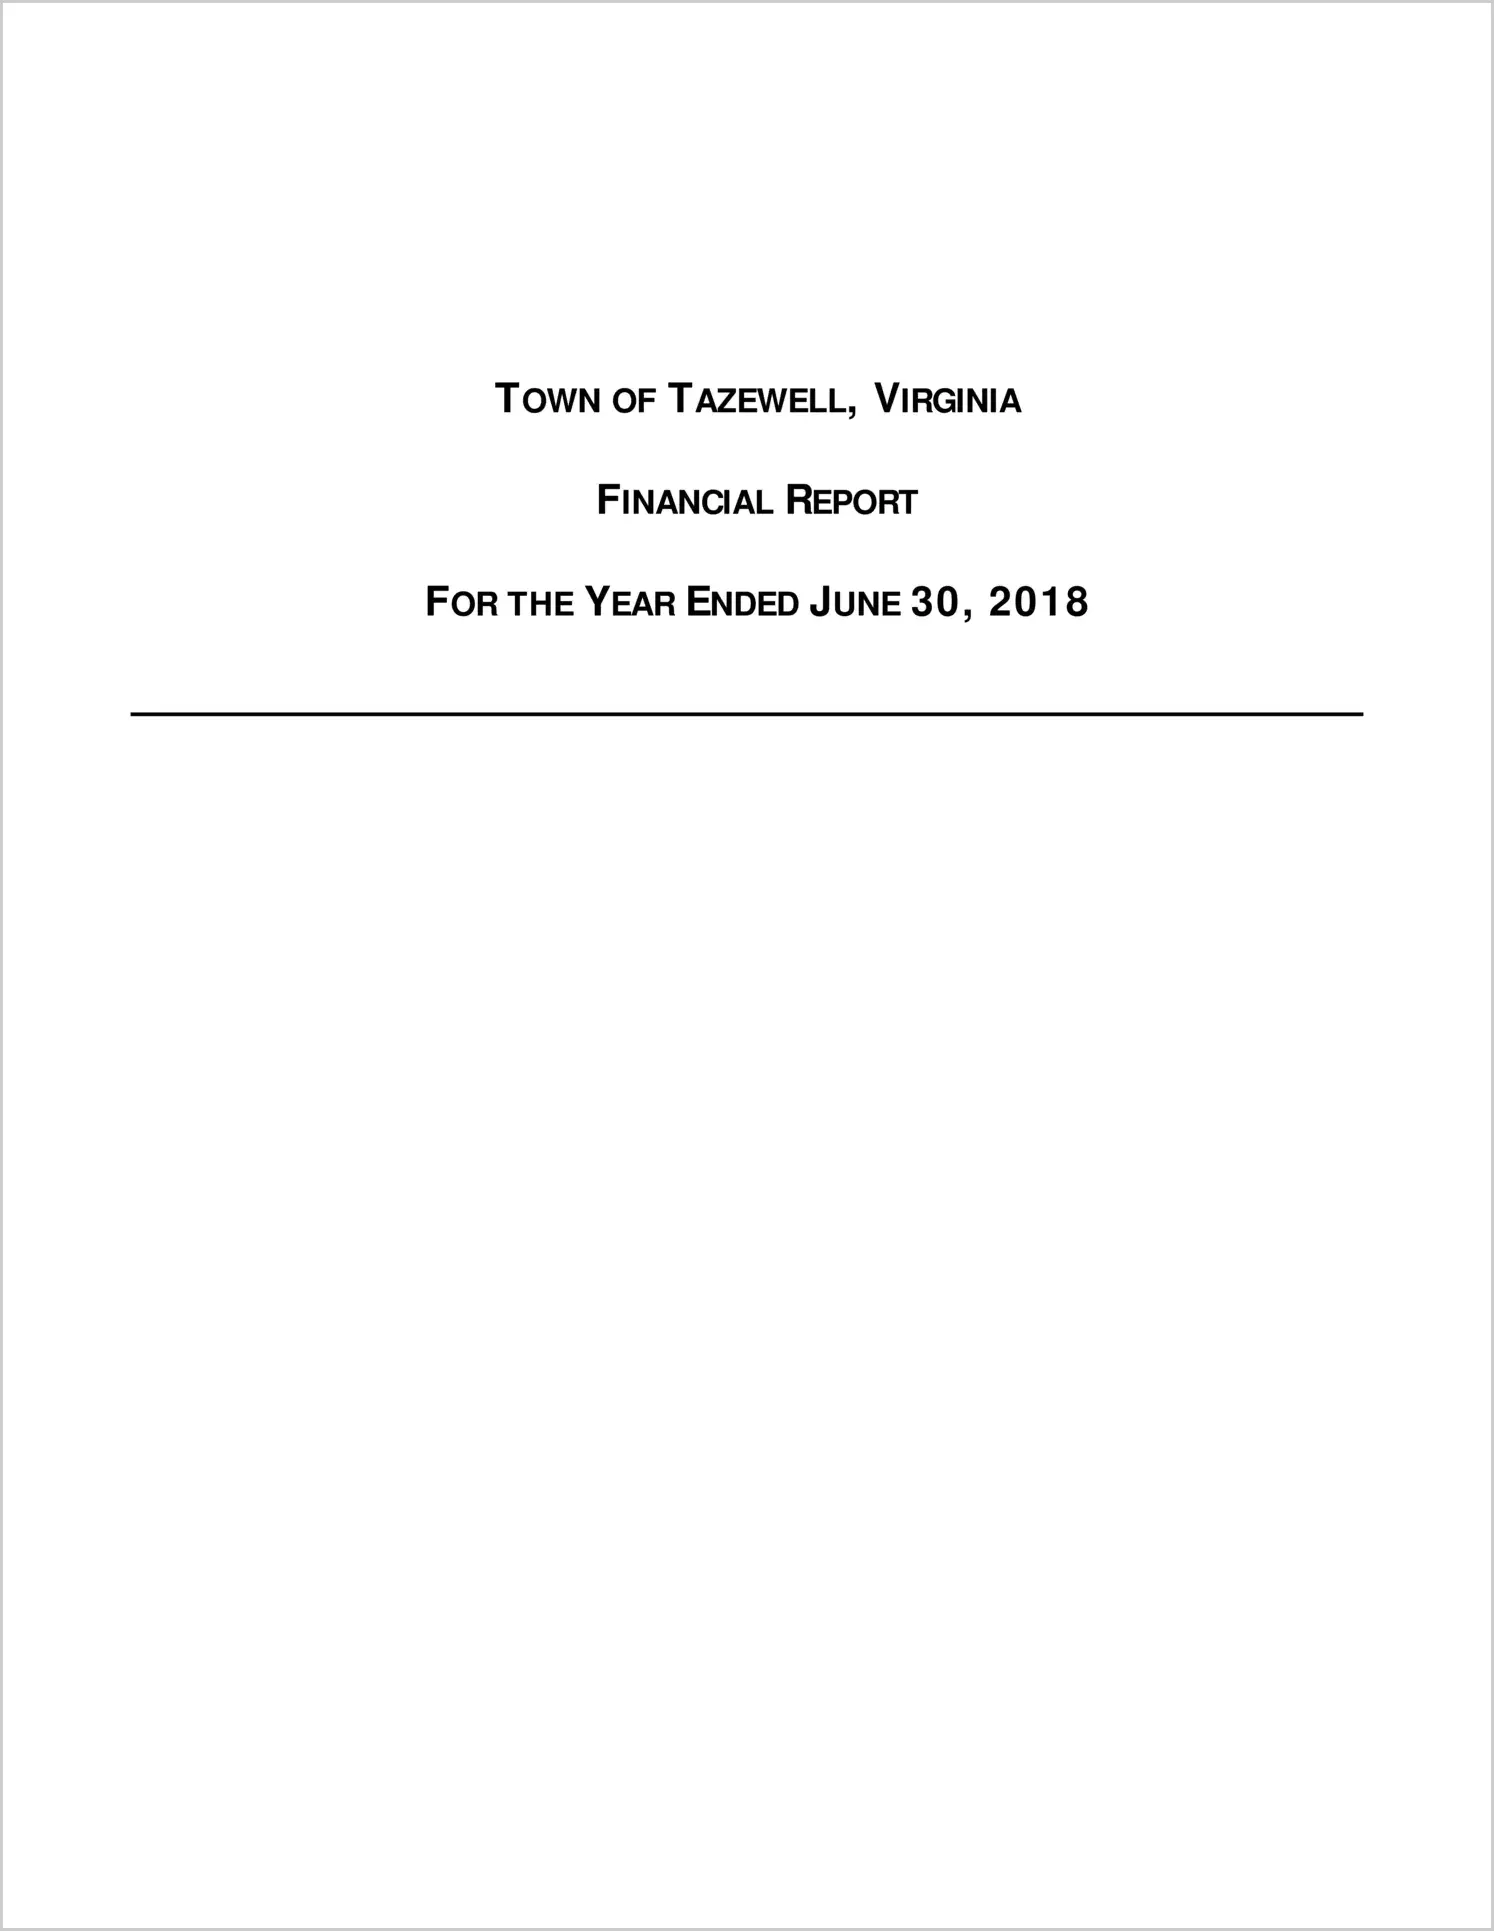 2018 Annual Financial Report for Town of Tazewell